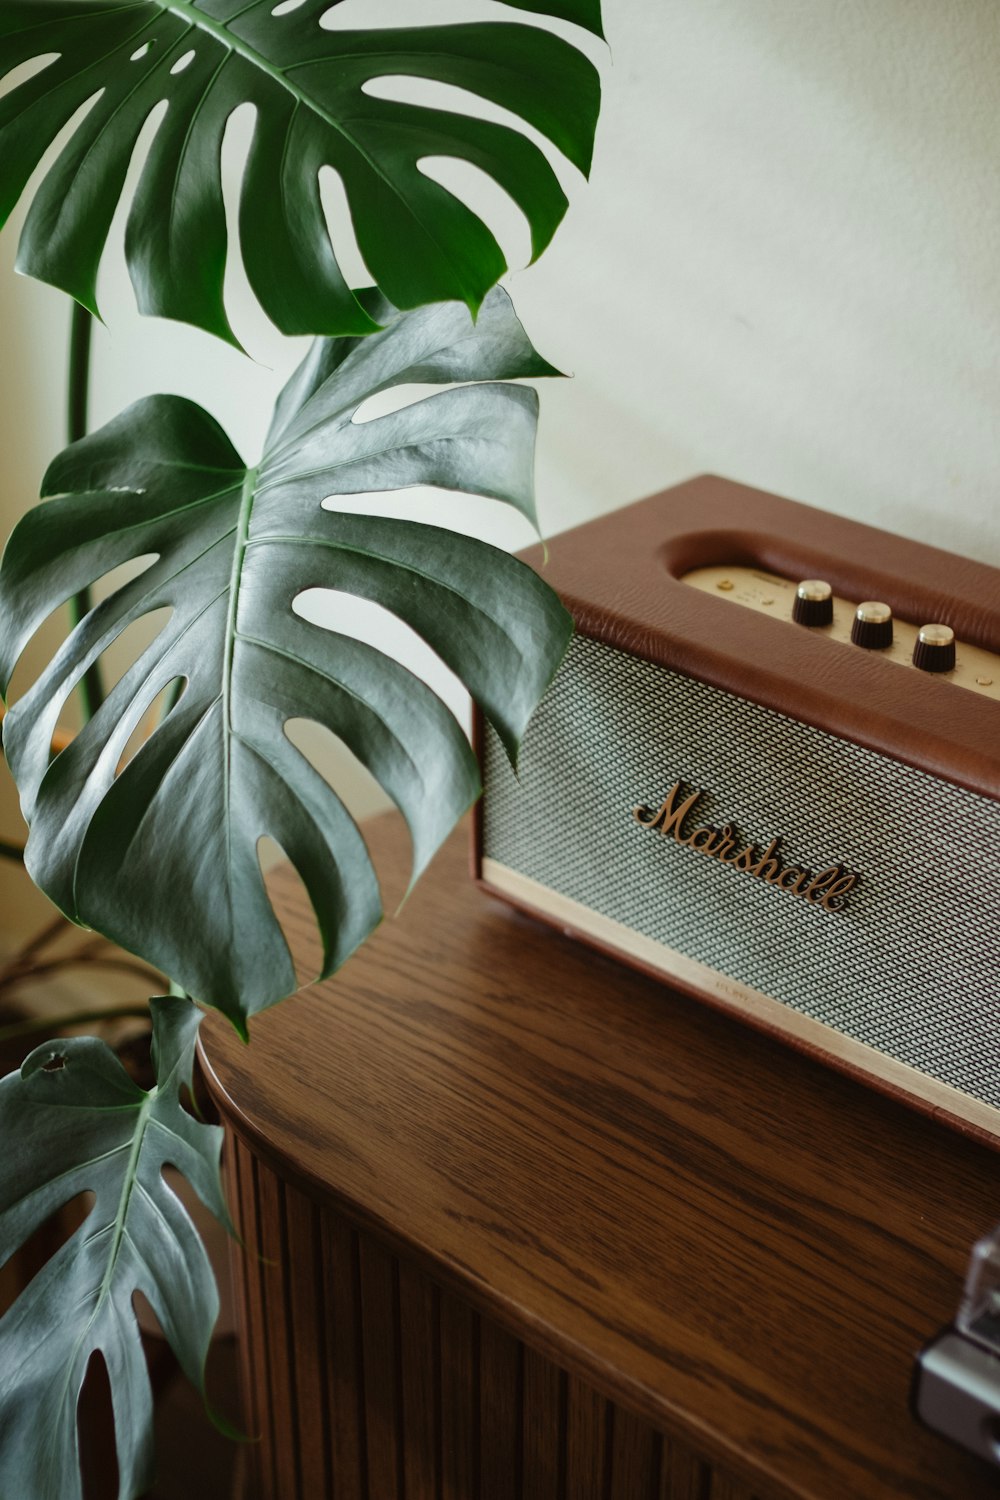 a radio sitting on top of a wooden table next to a plant